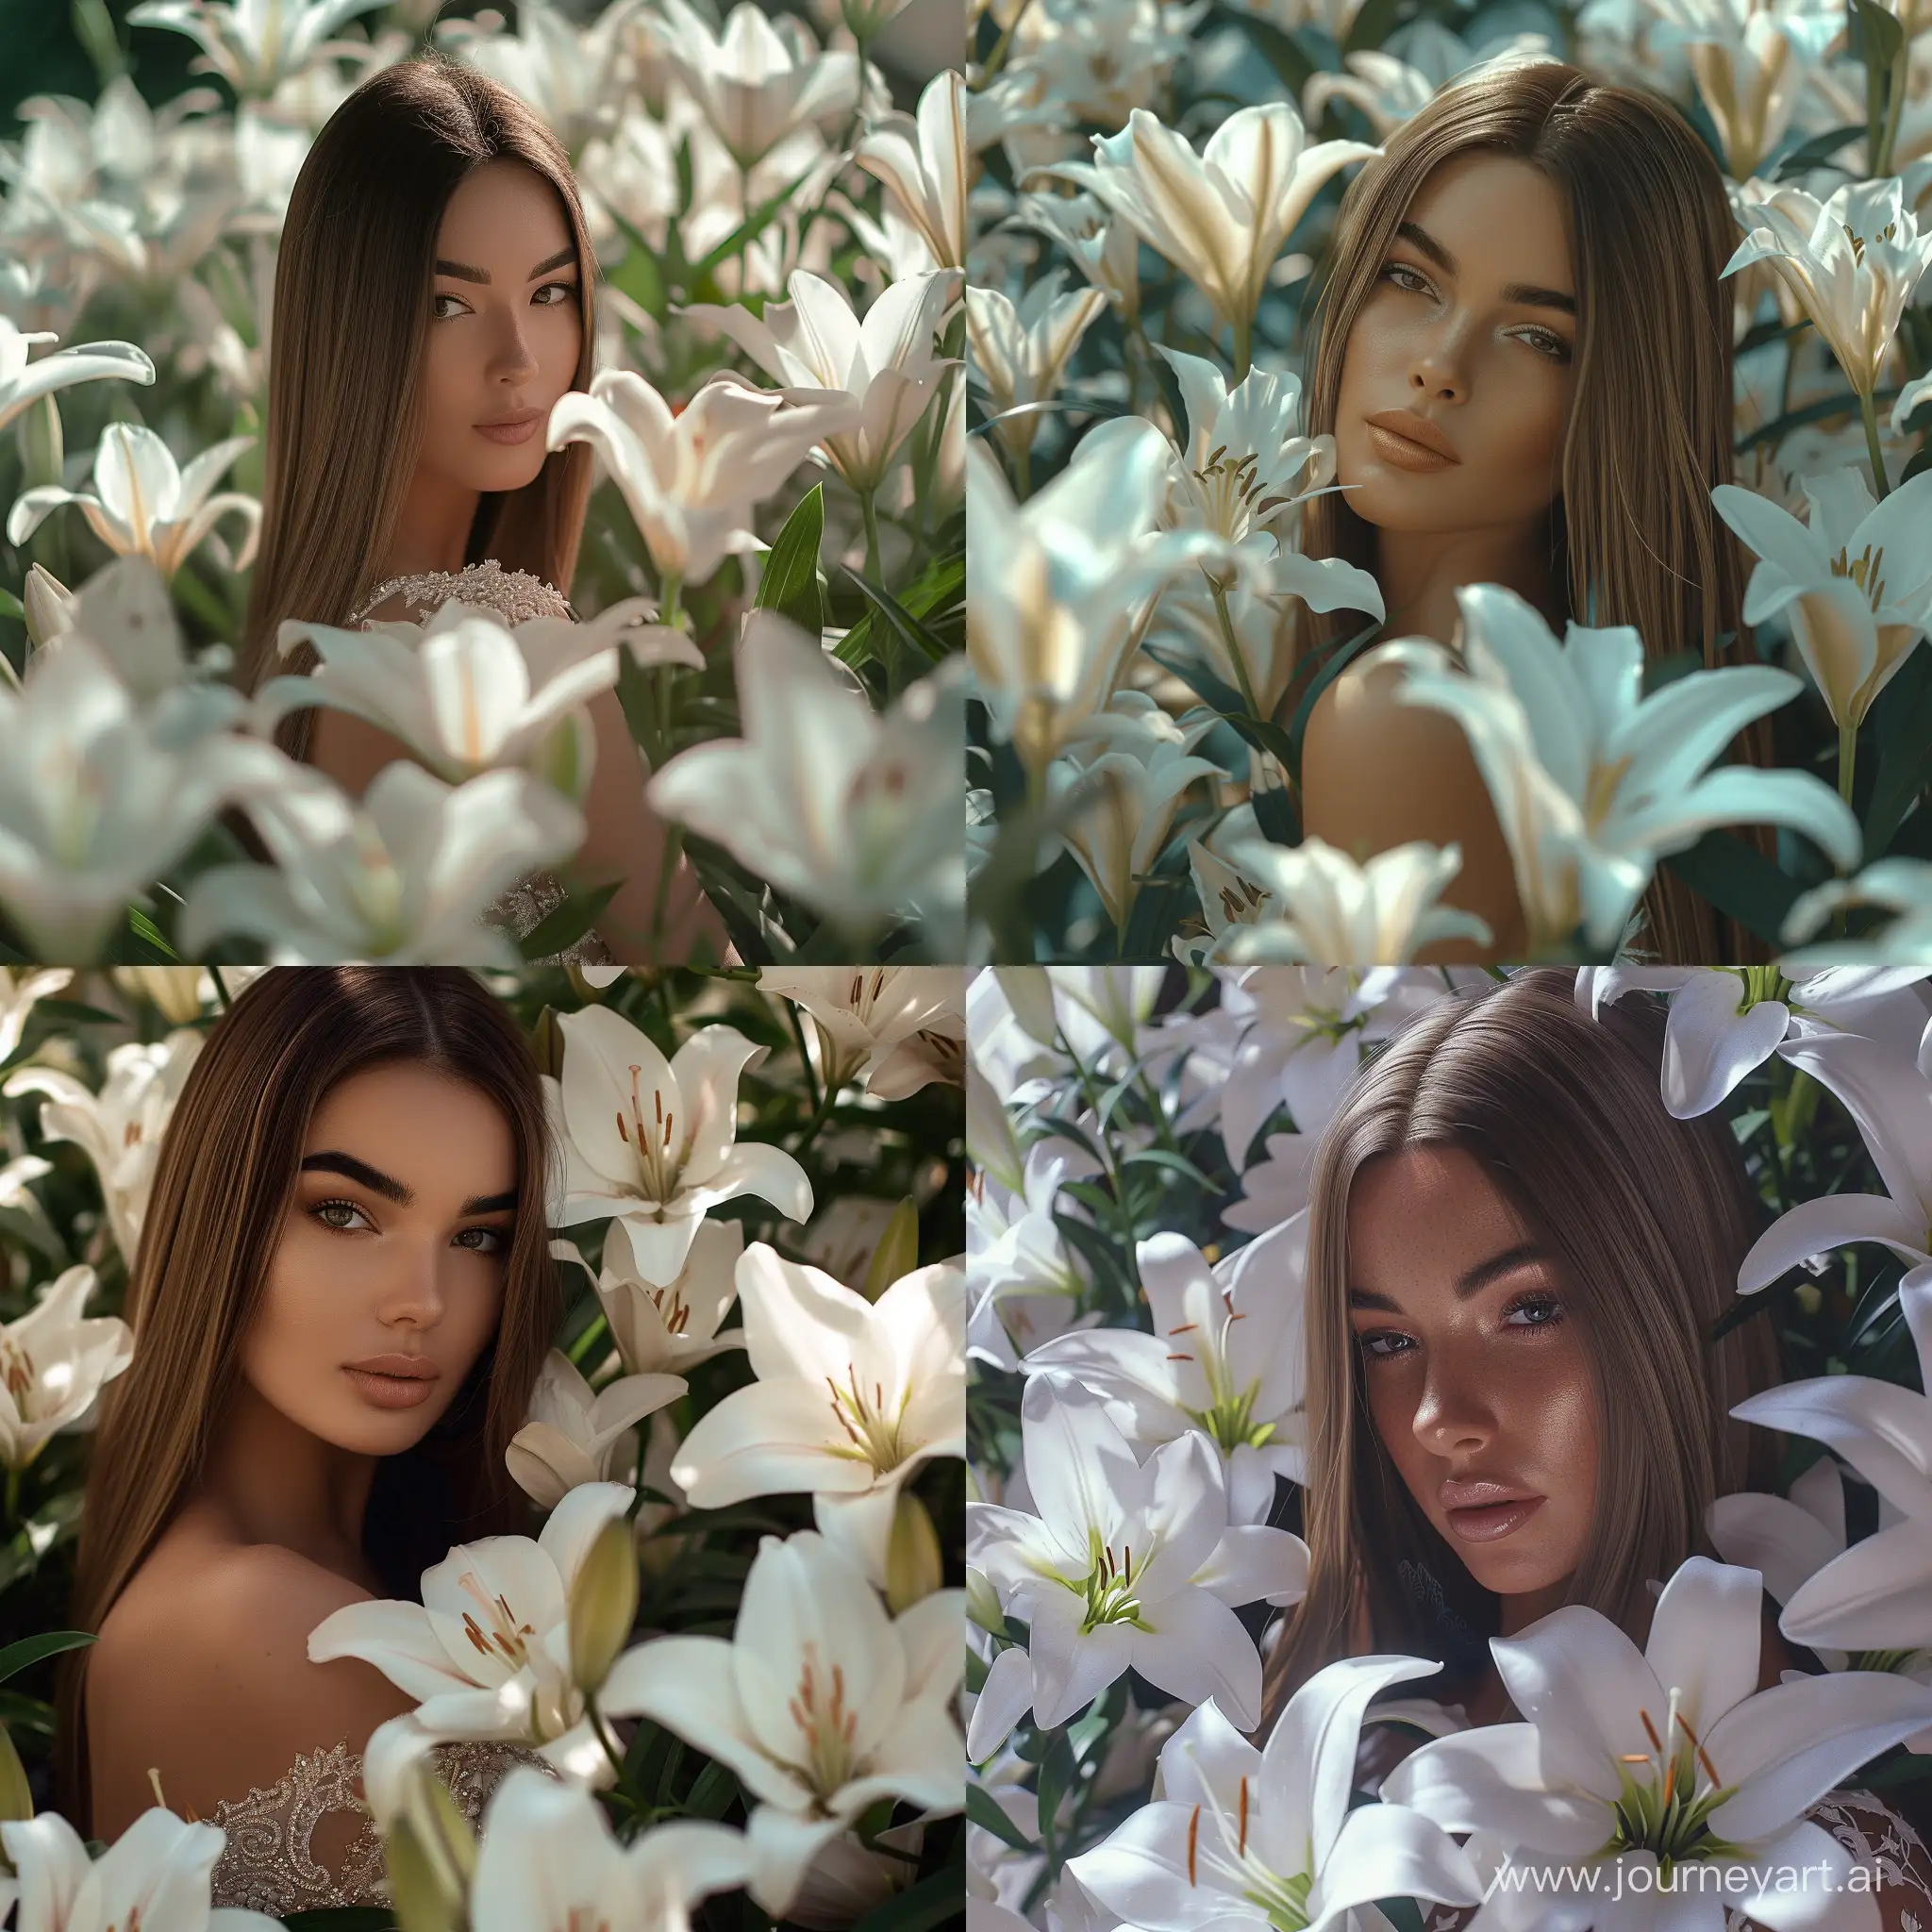 Beautiful woman with straight brown hair in the garden full of white lily flowers. She is wearing luxury dress. Close up detailed realistic image.